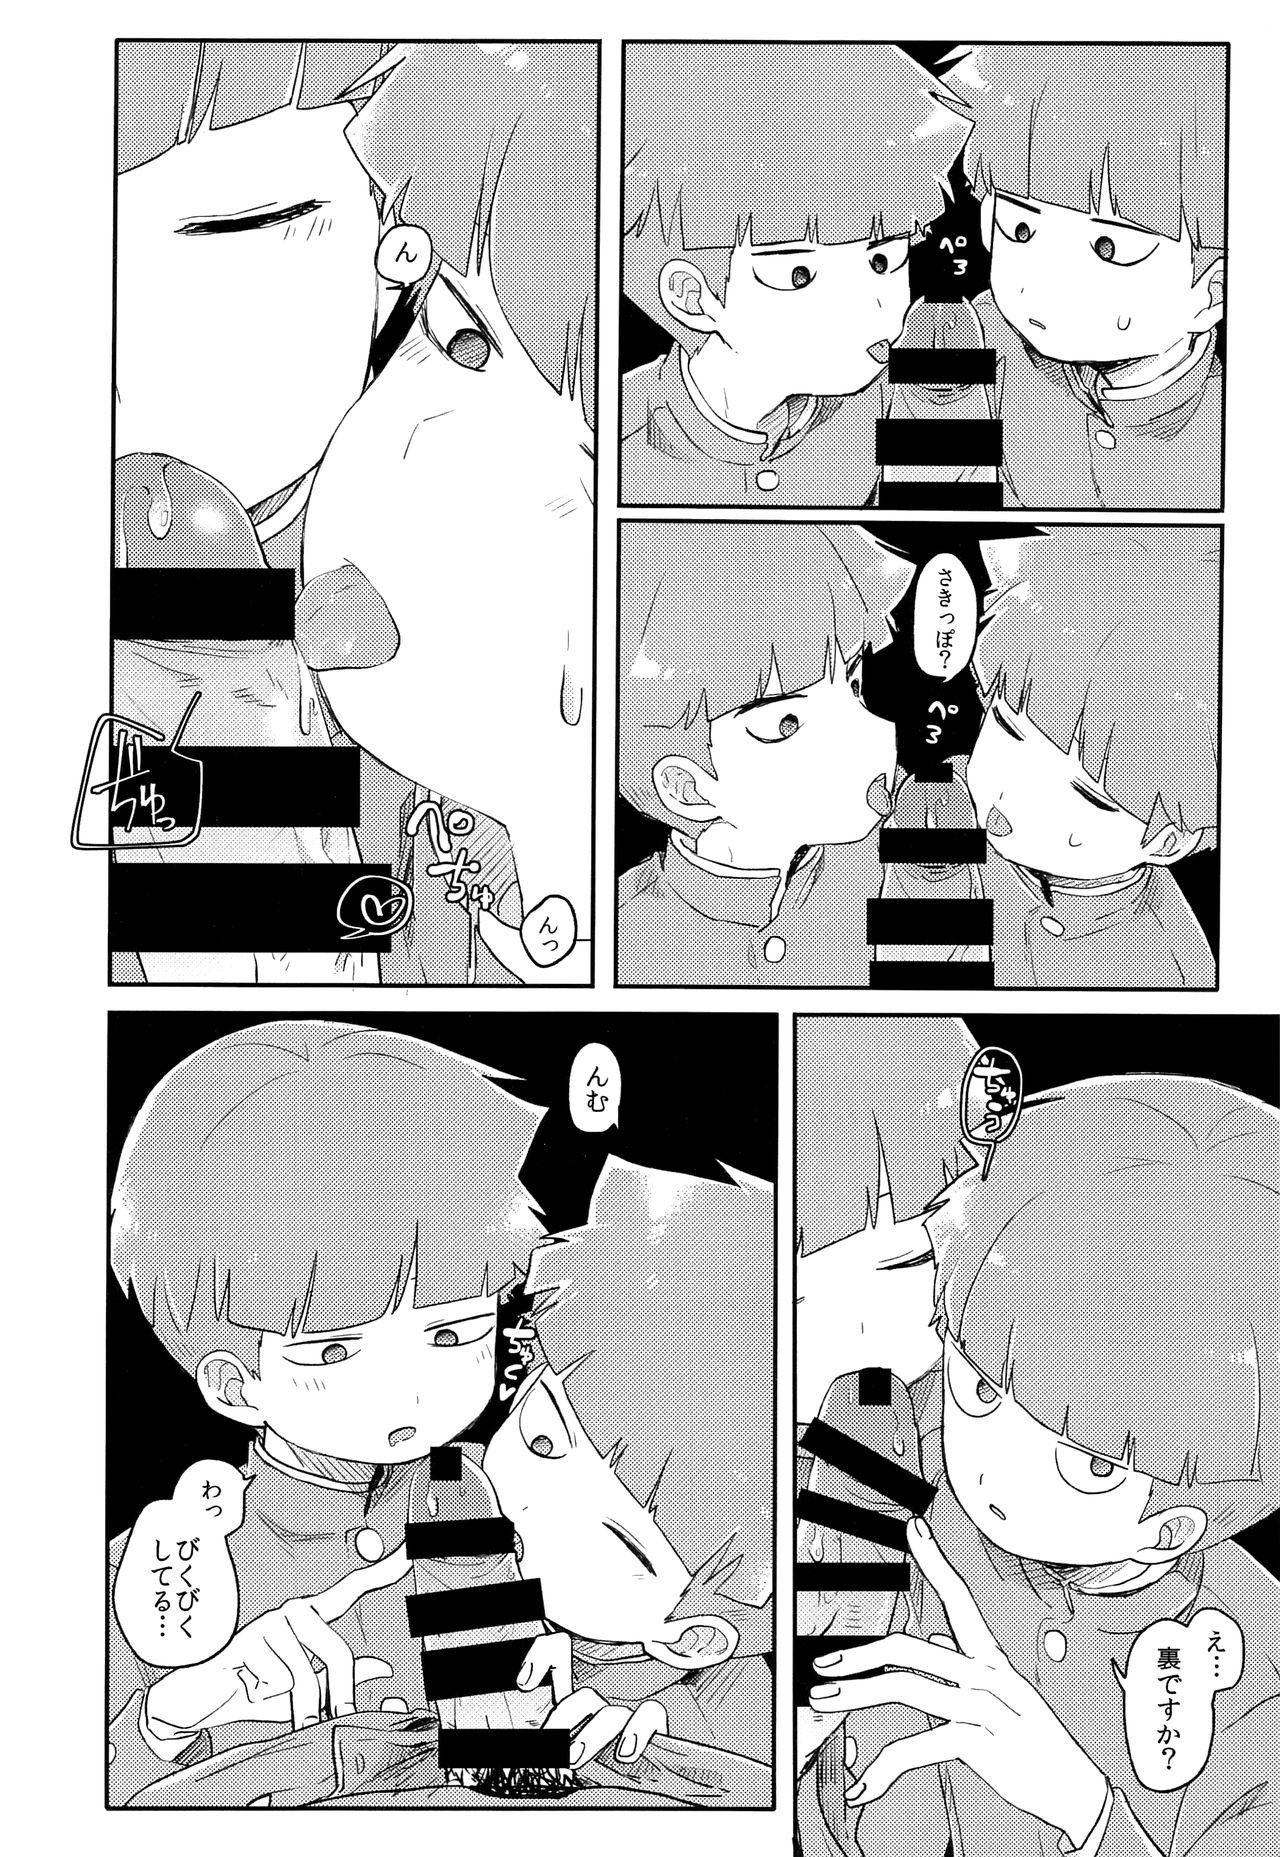 Double Blowjob Dare? - Mob psycho 100 Farting - Page 4